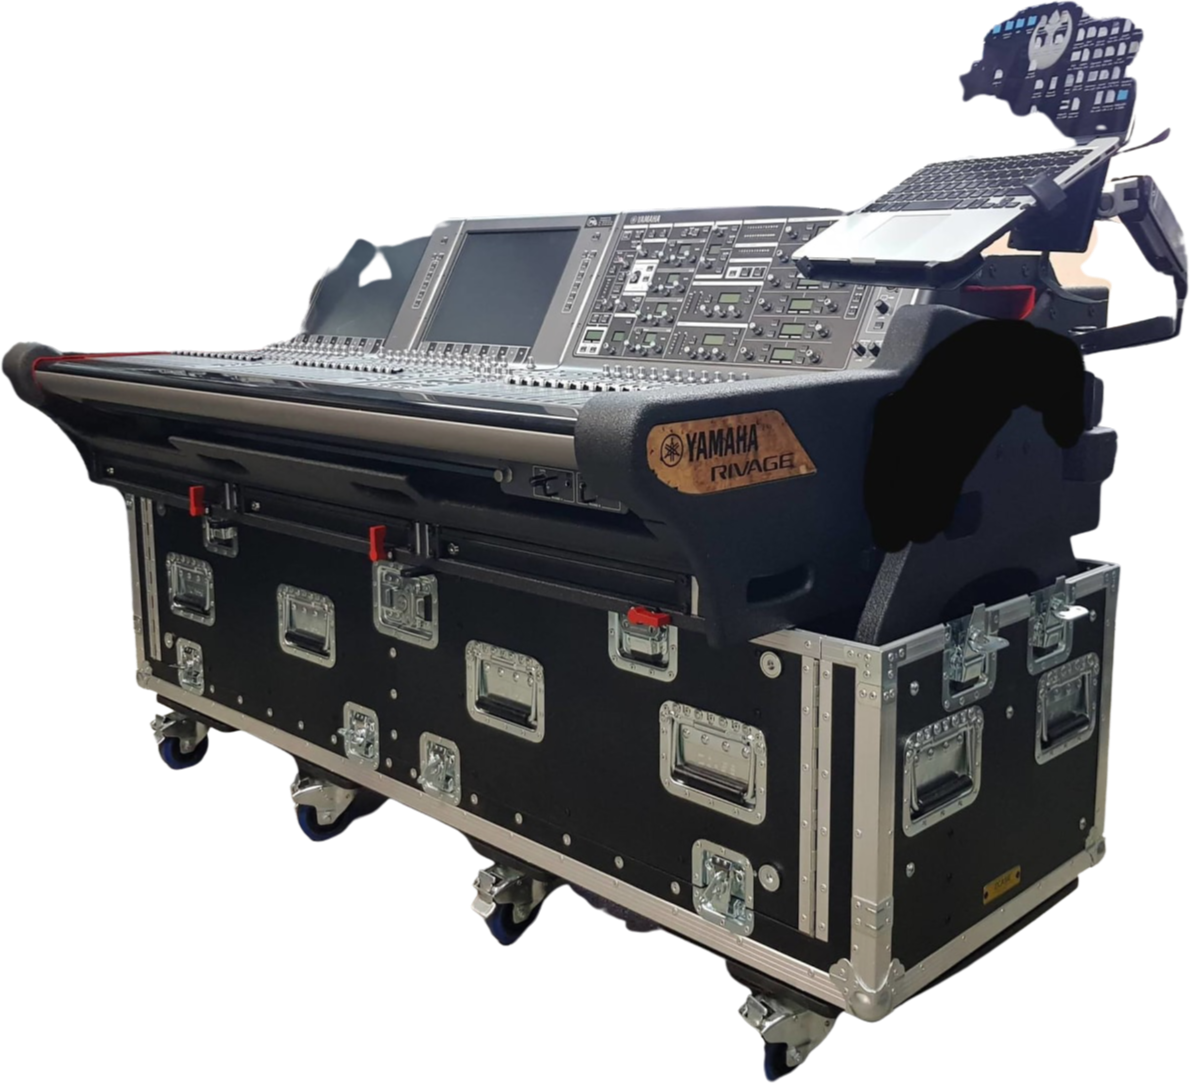 Pro X For Yamaha PM7/10 Rivage Flip-Ready Hydraulic Console Easy Detachable Lifting Flight Case with Wheels by ZCASE XZF-YPM7/10 RIVAGE D3U